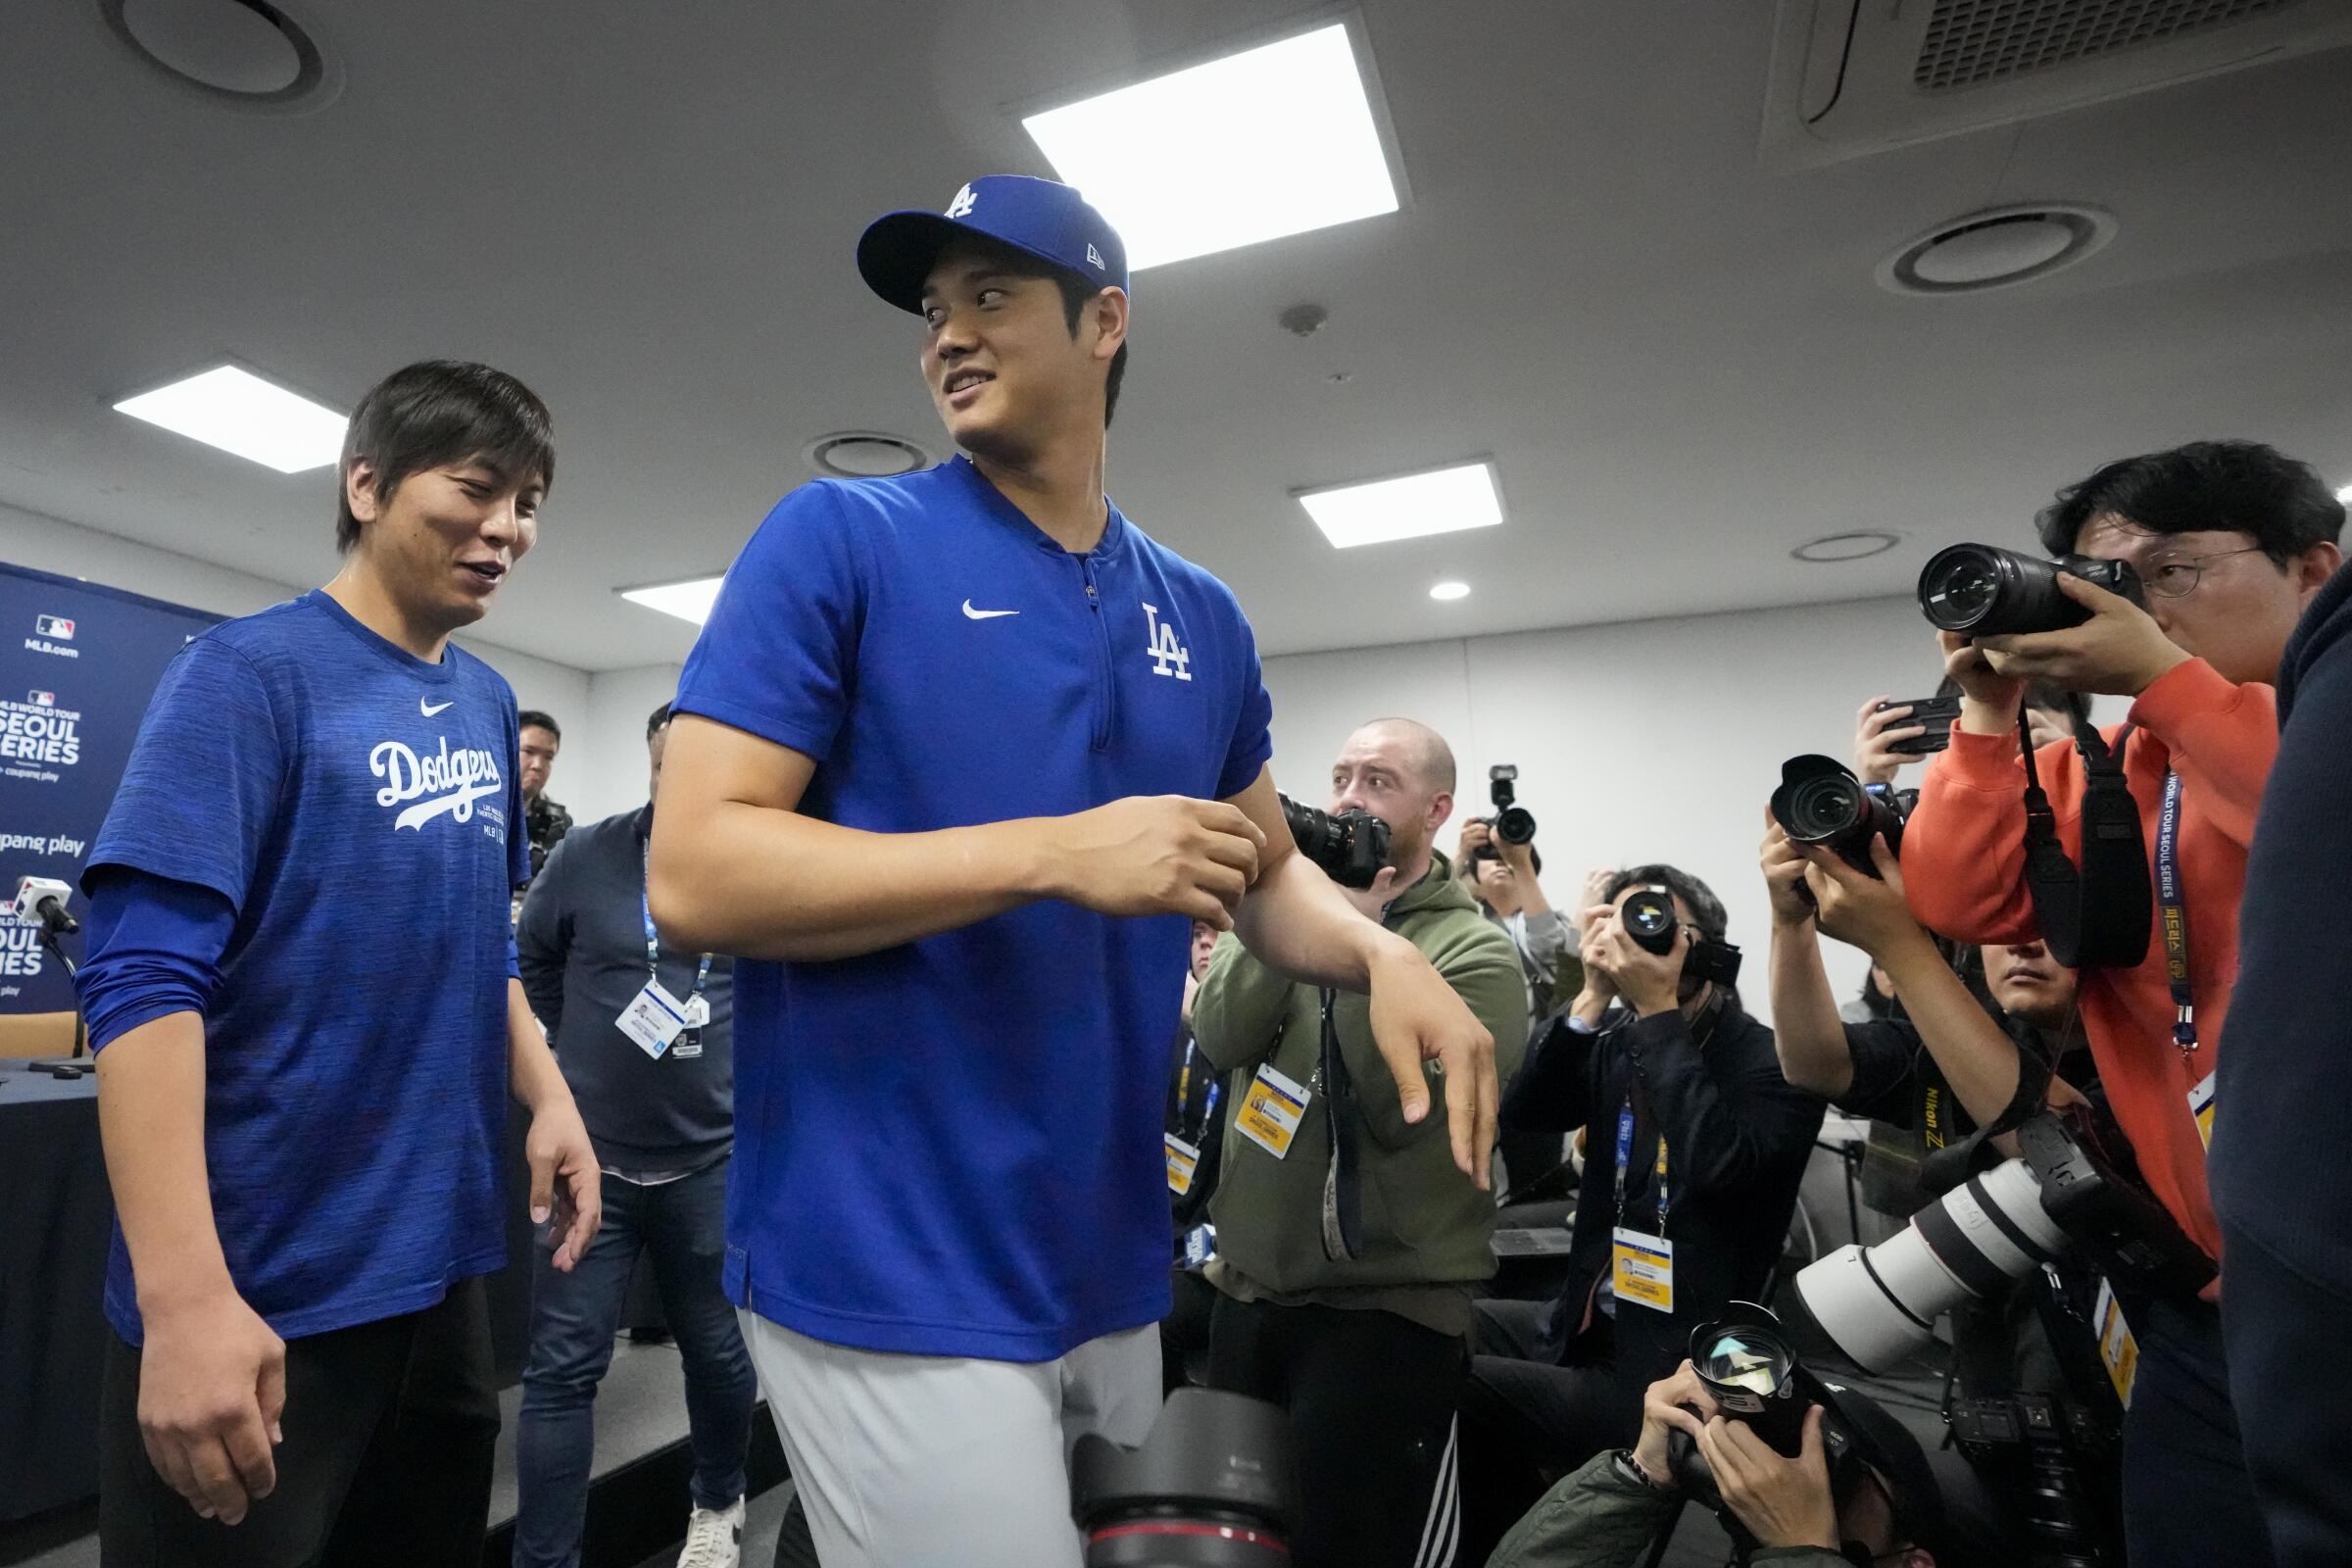 Dodgers star Shohei Ohtani, right, and his interpreter, Ippei Mizuhara, exit after a news conference.